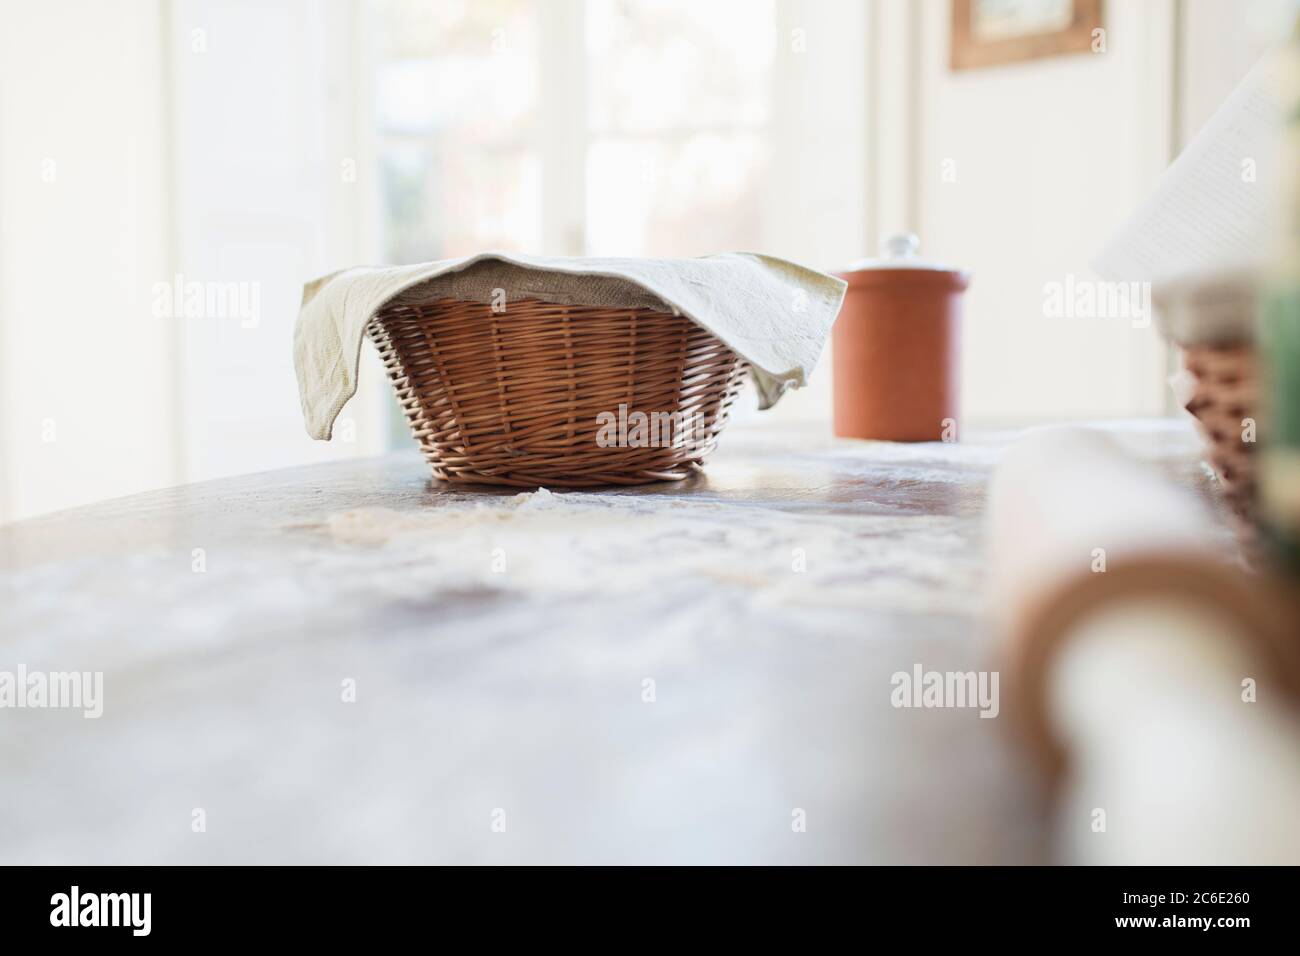 Bread dough proofing in basket on kitchen counter Stock Photo